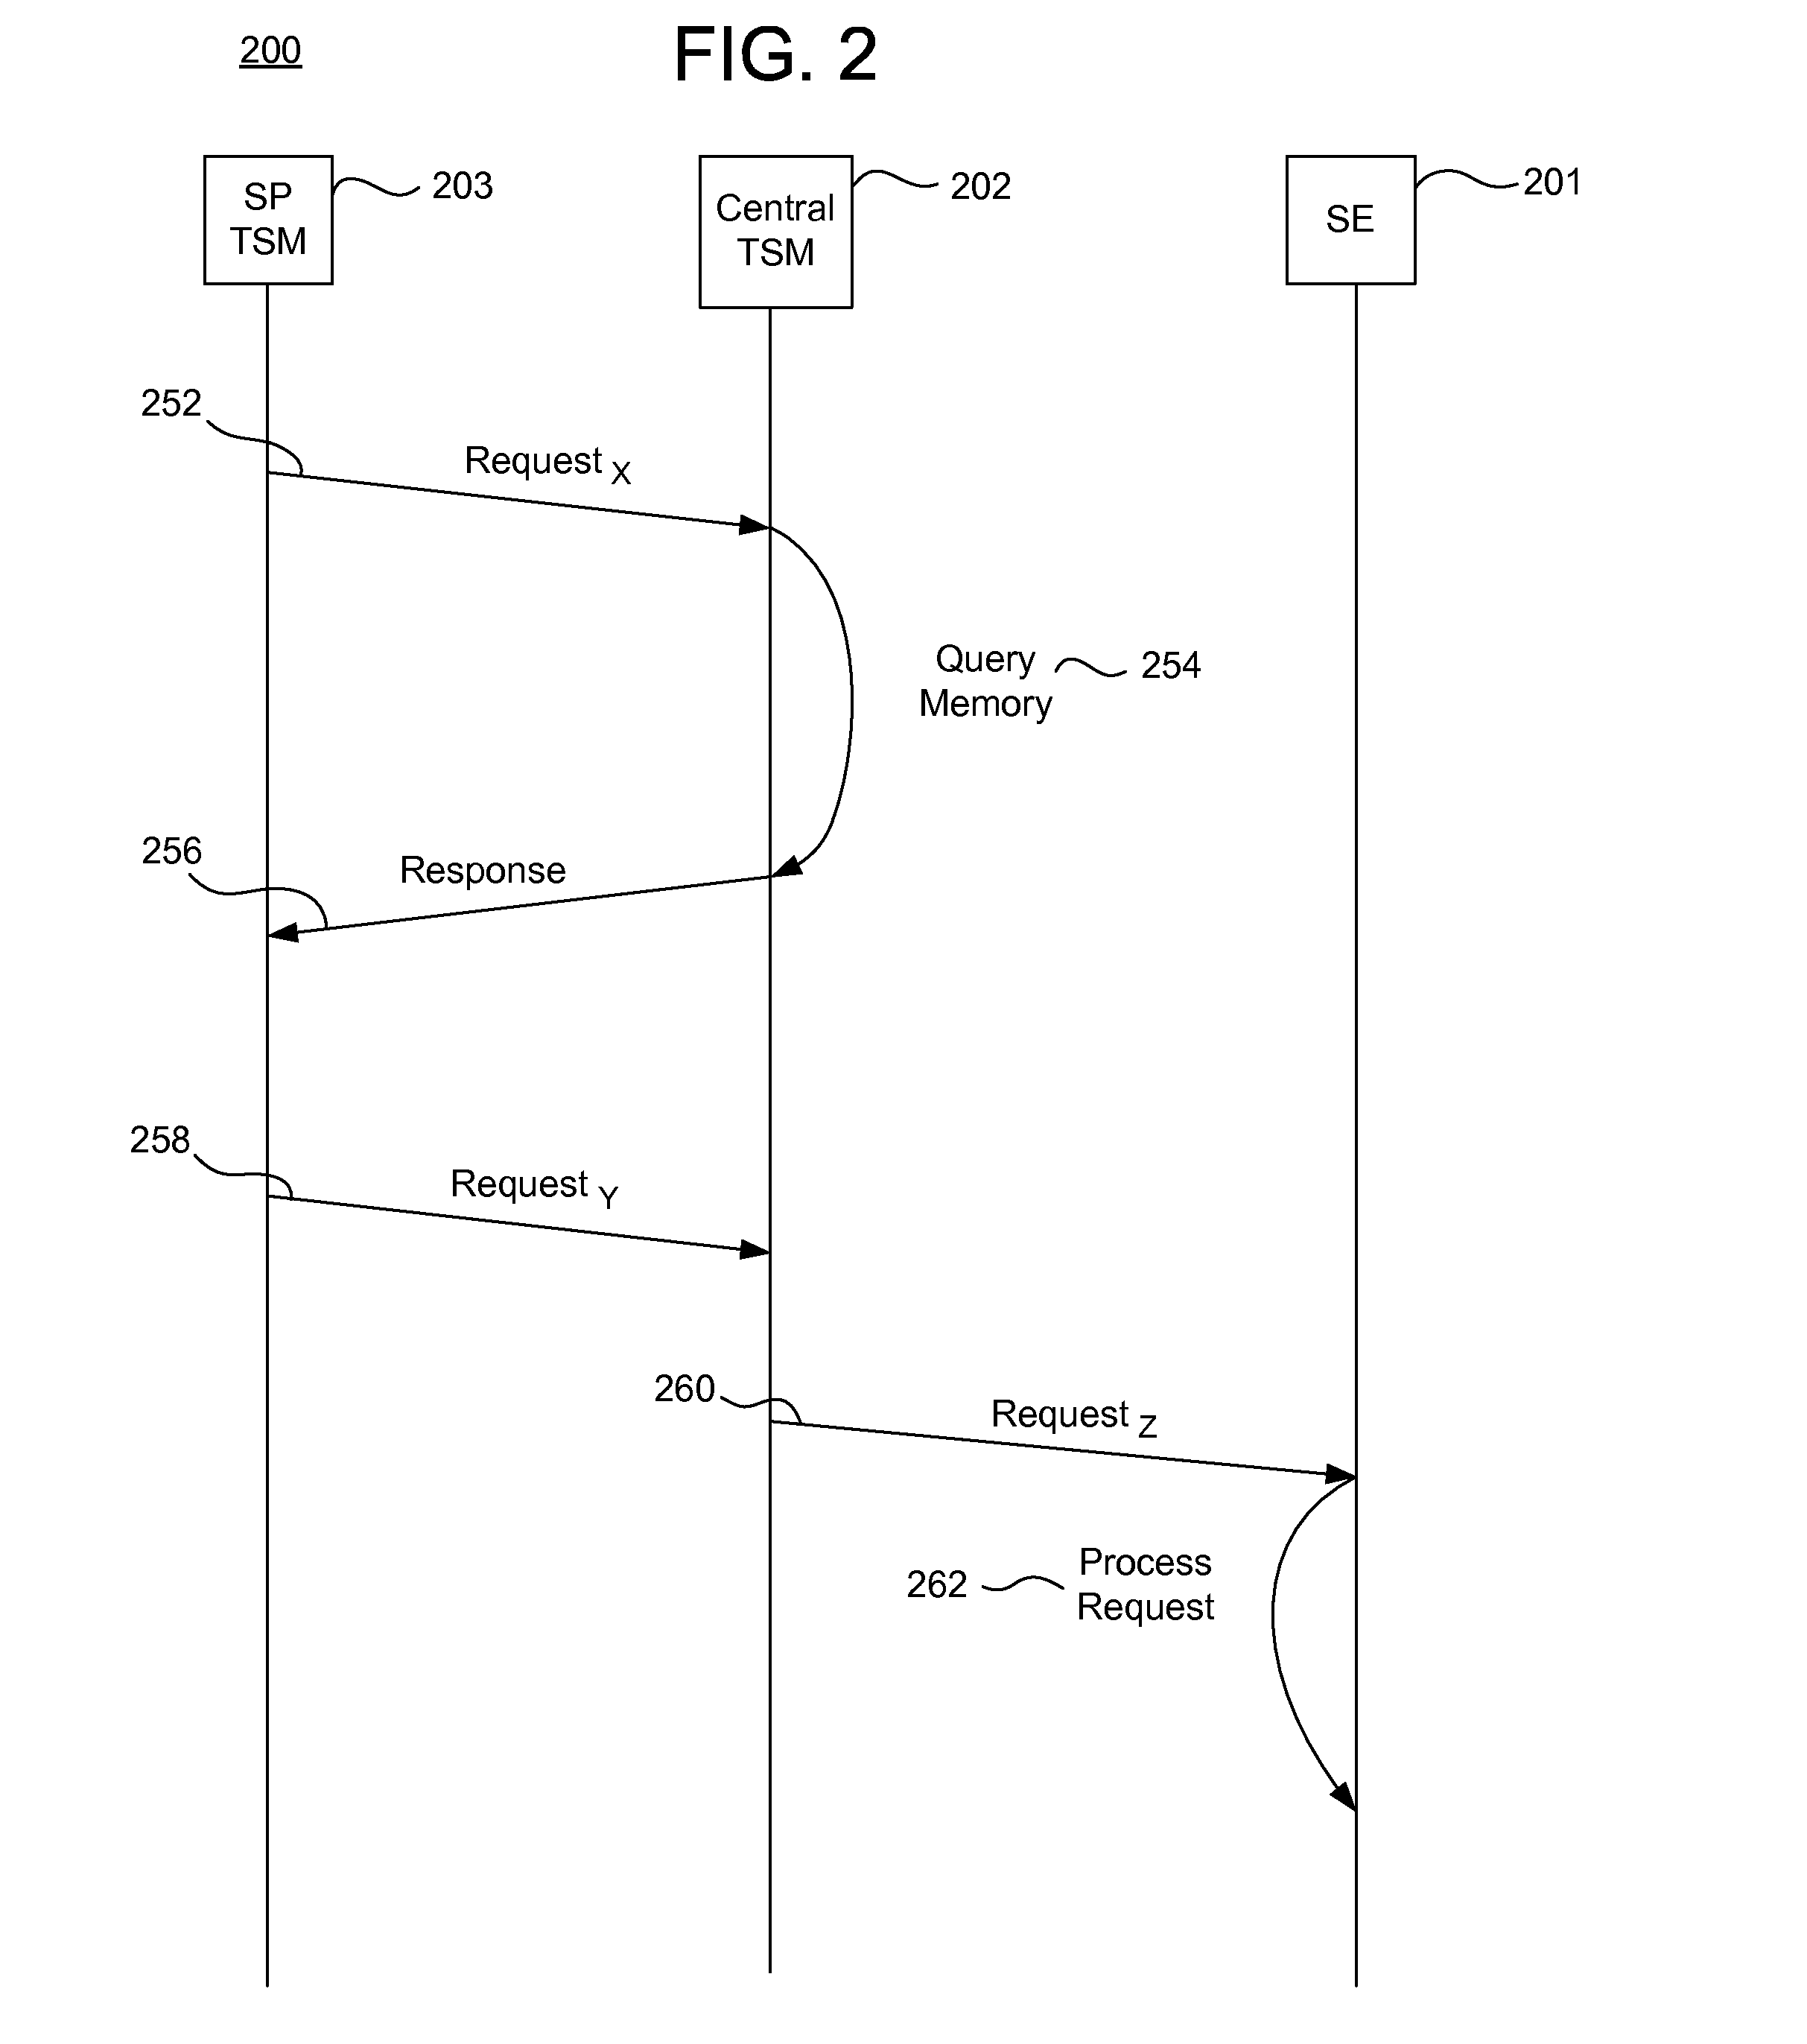 Systems, methods, and computer program products for managing secure elements